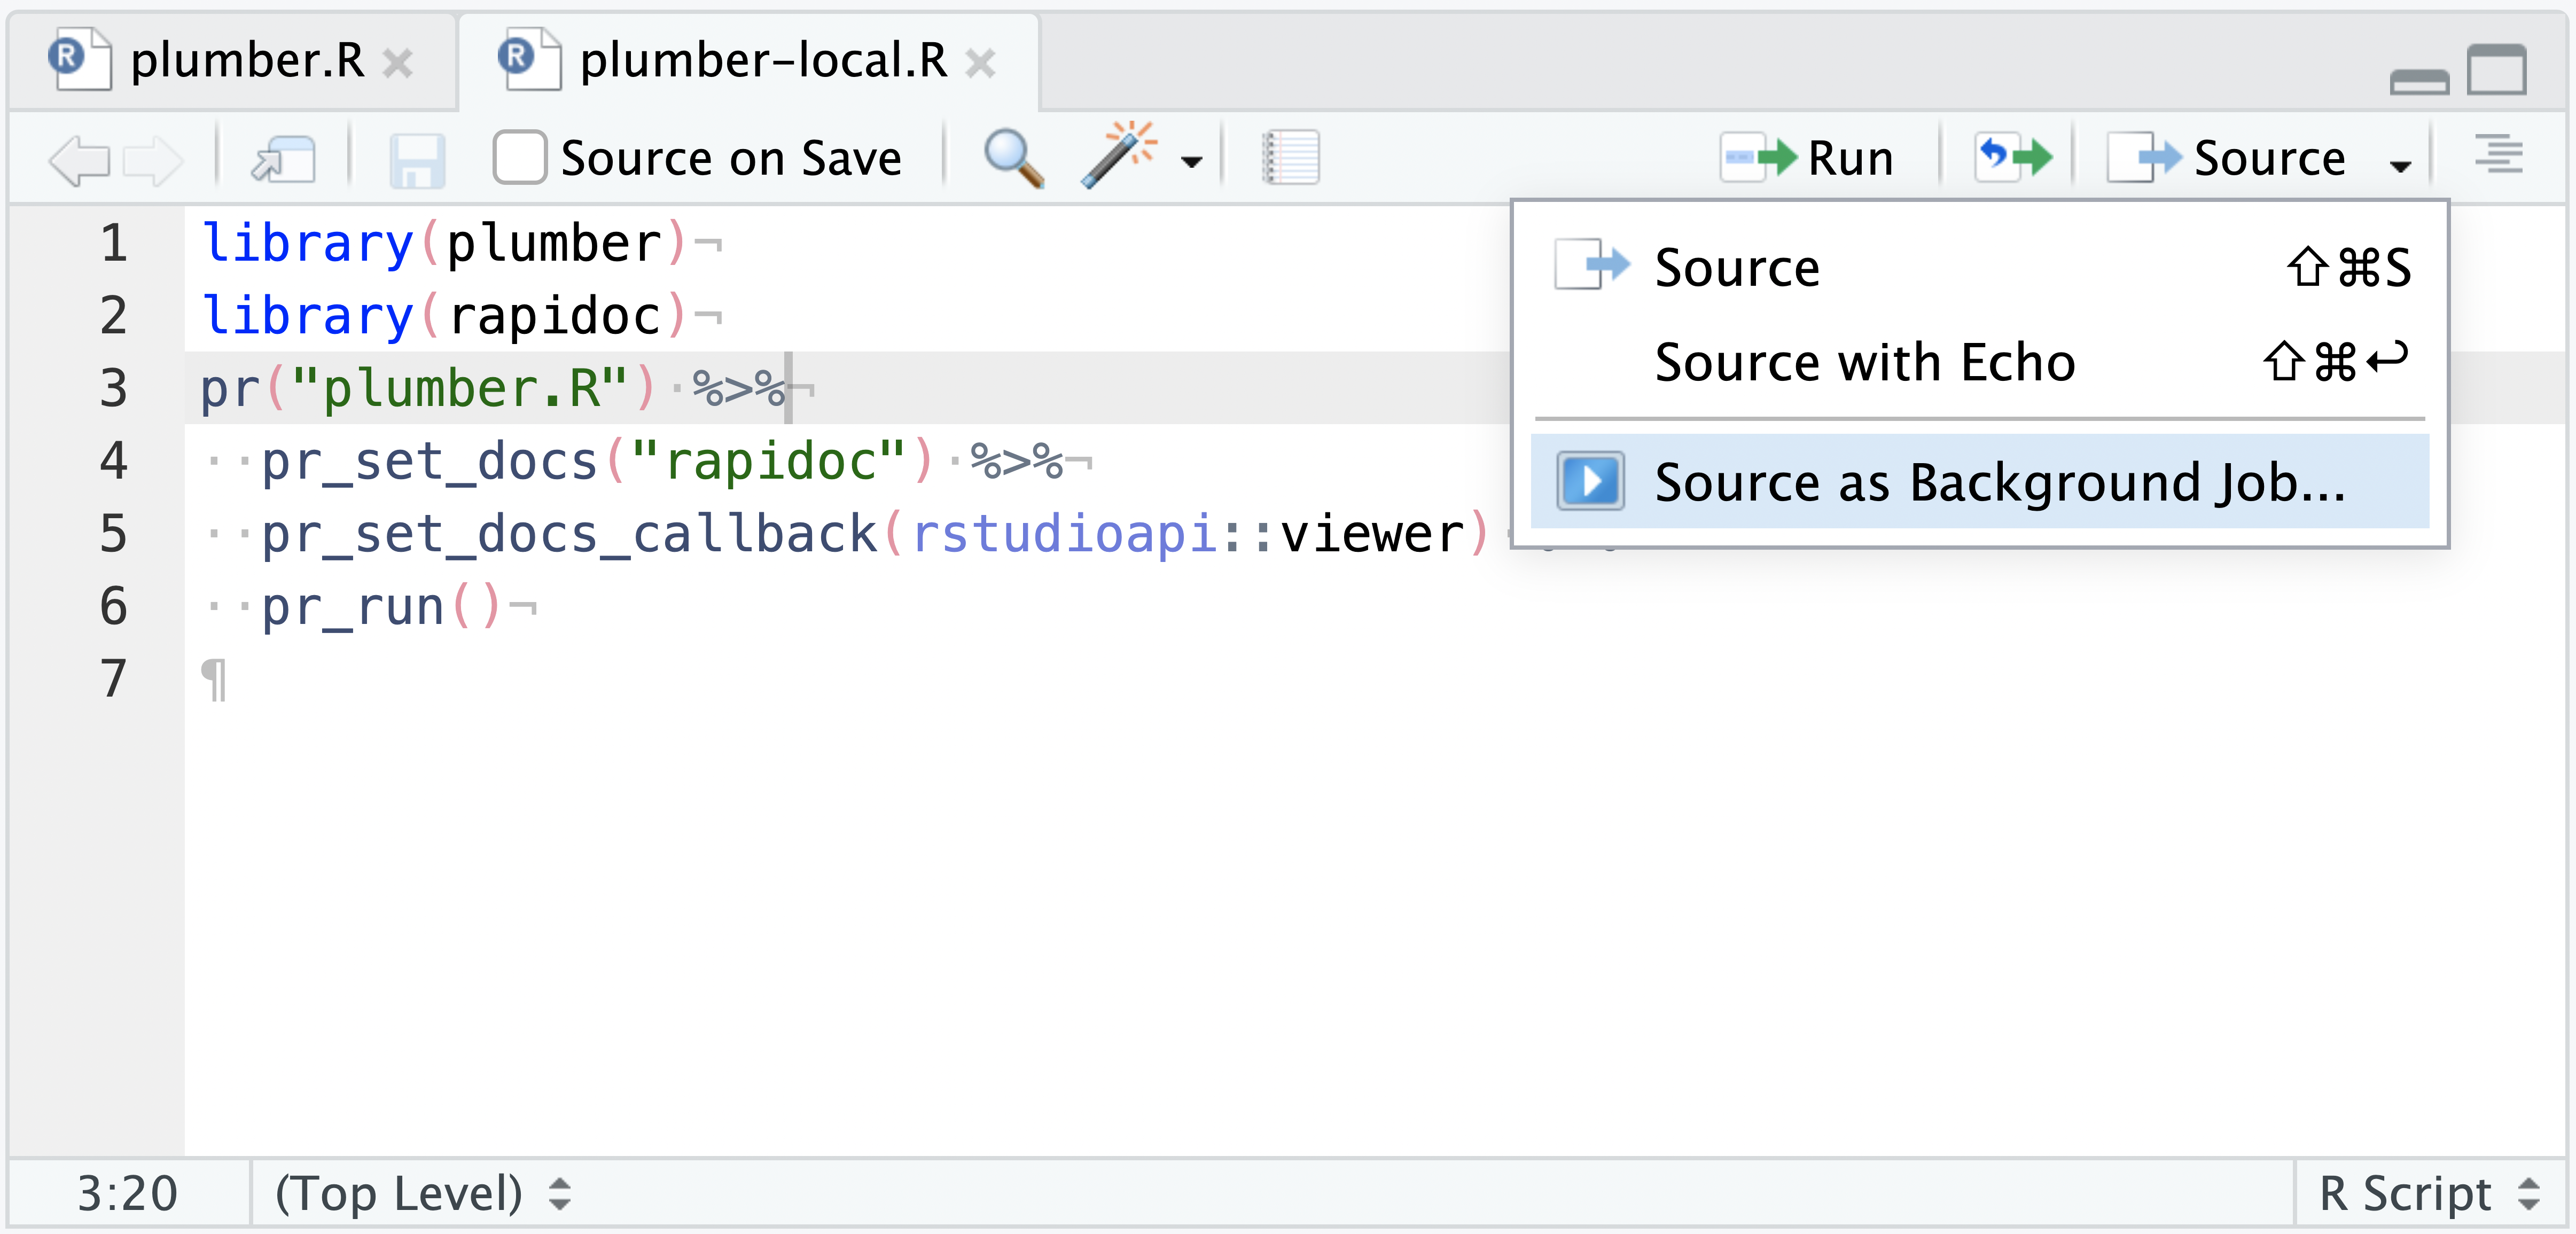 A screenshot of the Source pane, with the Source > Source as Background Job drop-down option highlighted.